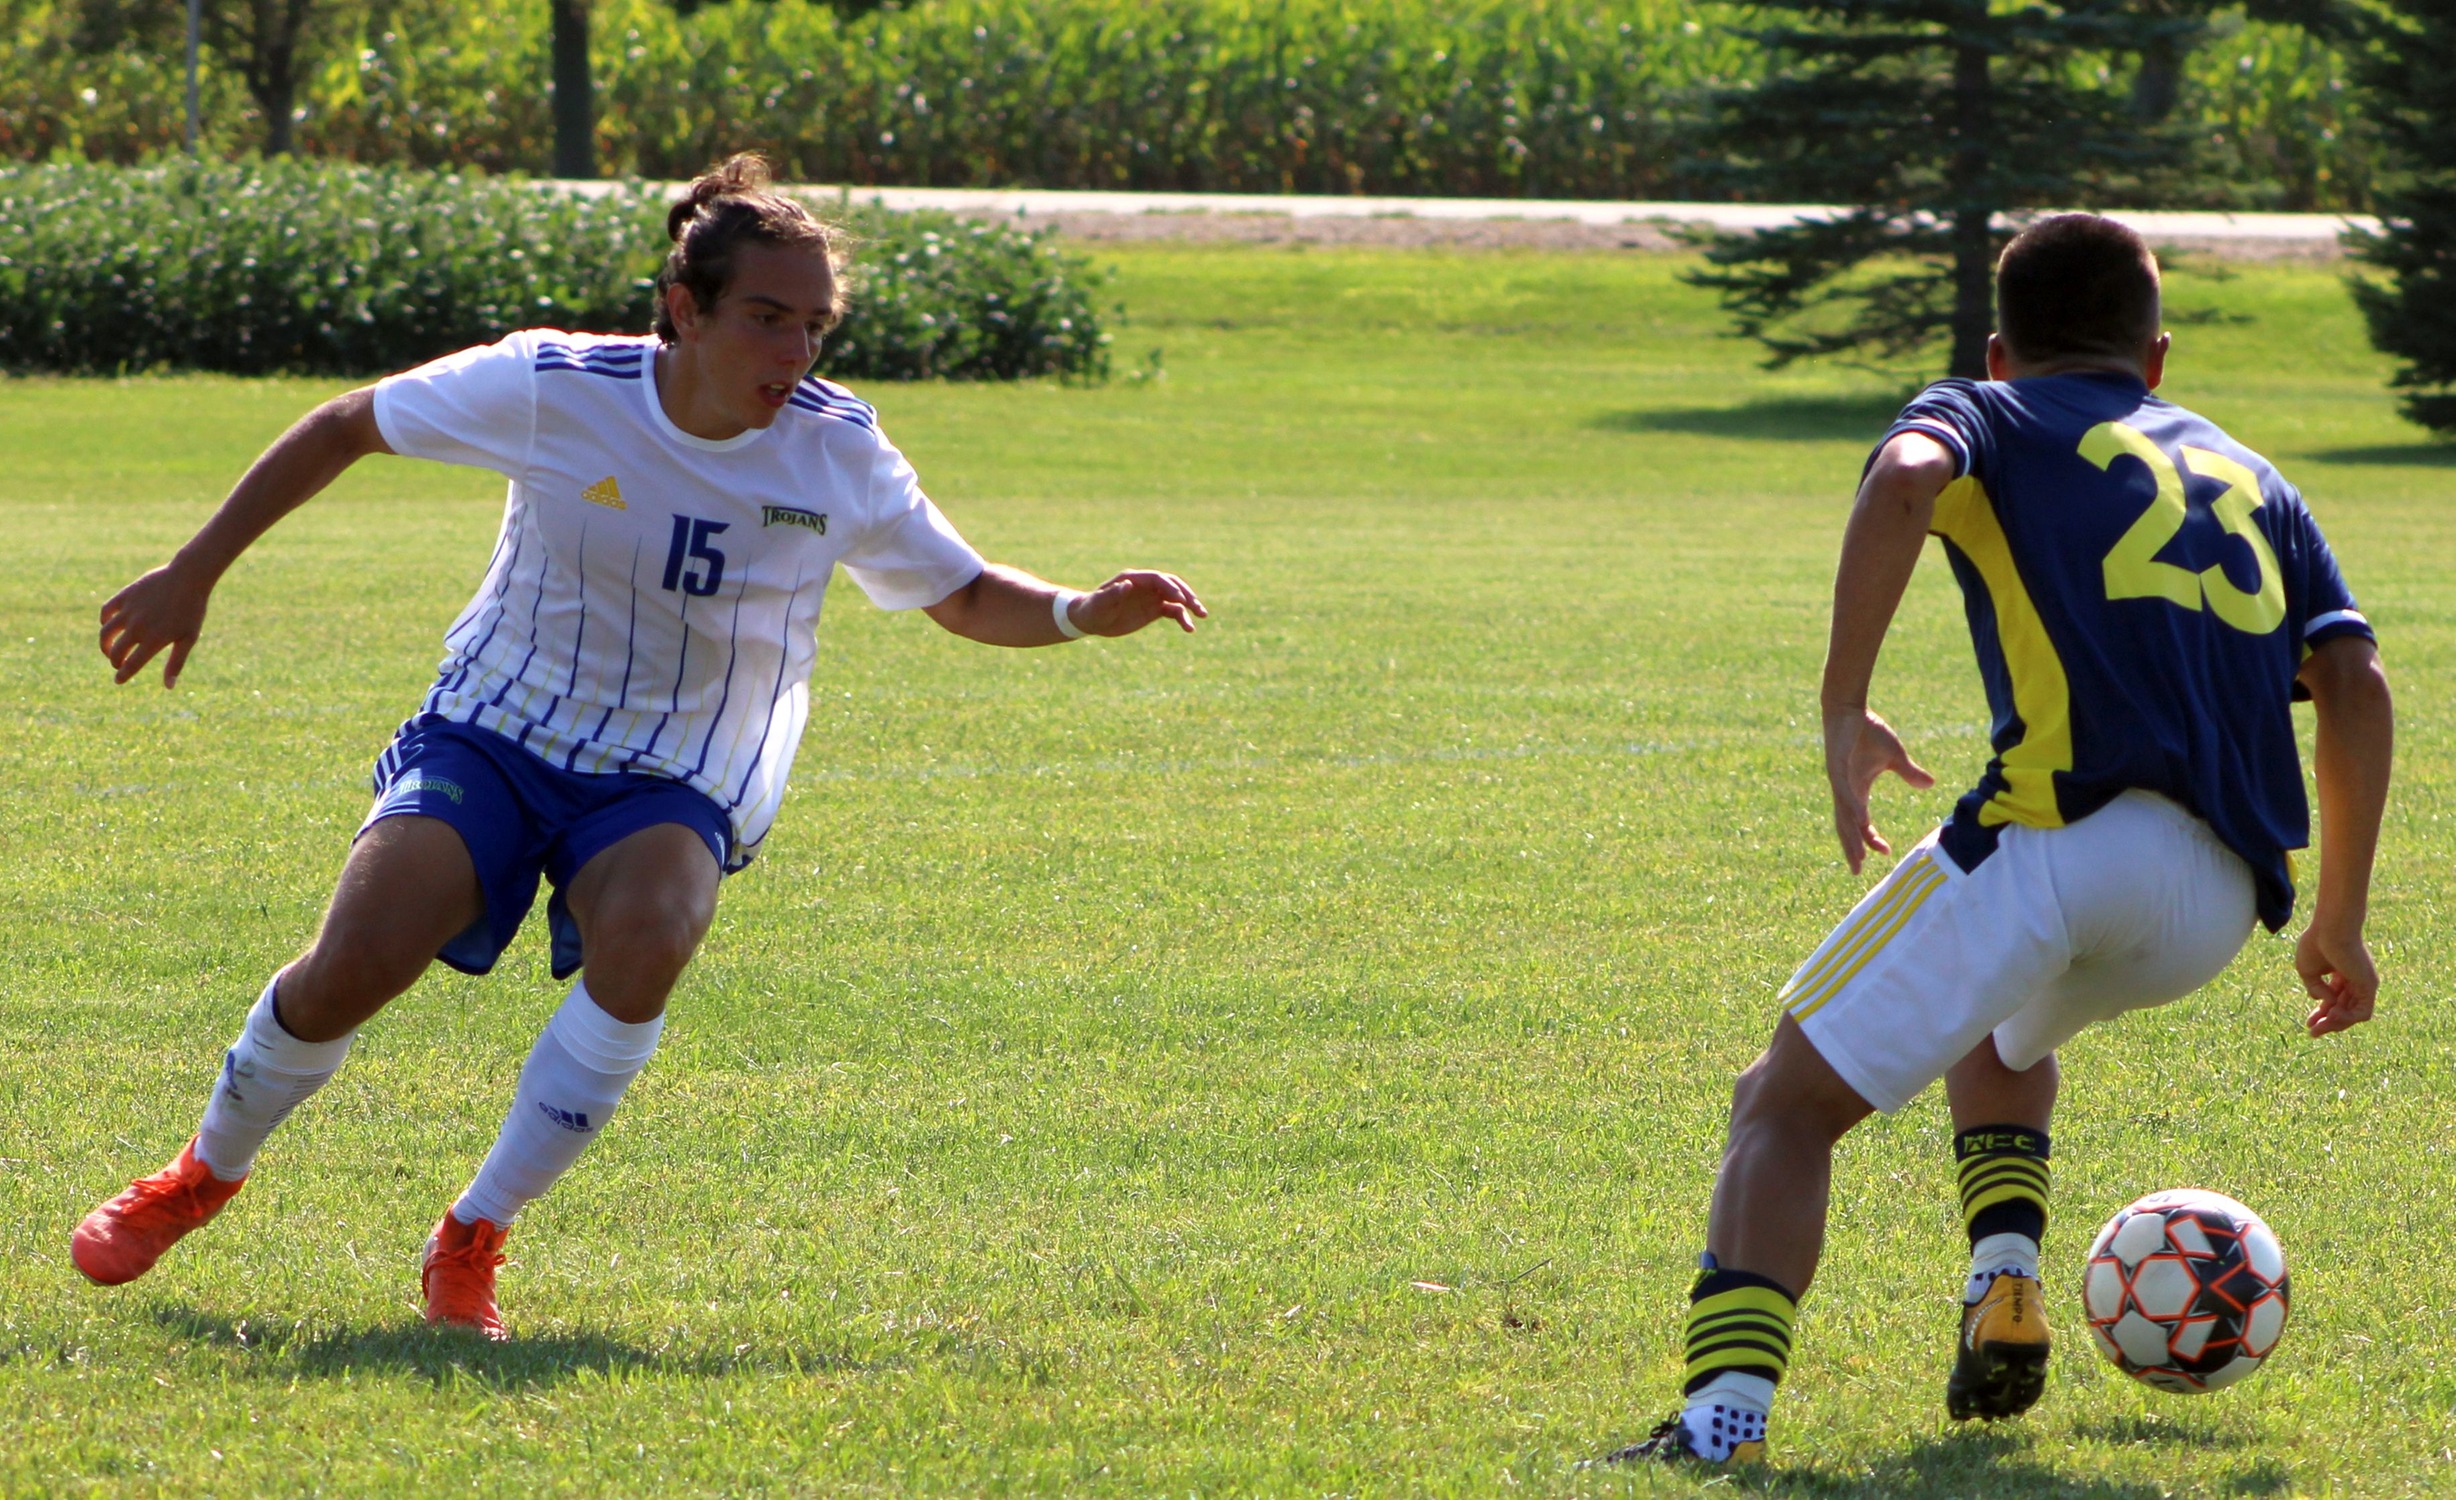 NIACC's Gian Lucca Scatolin defends during Wednesday's match against Marshalltown CC.